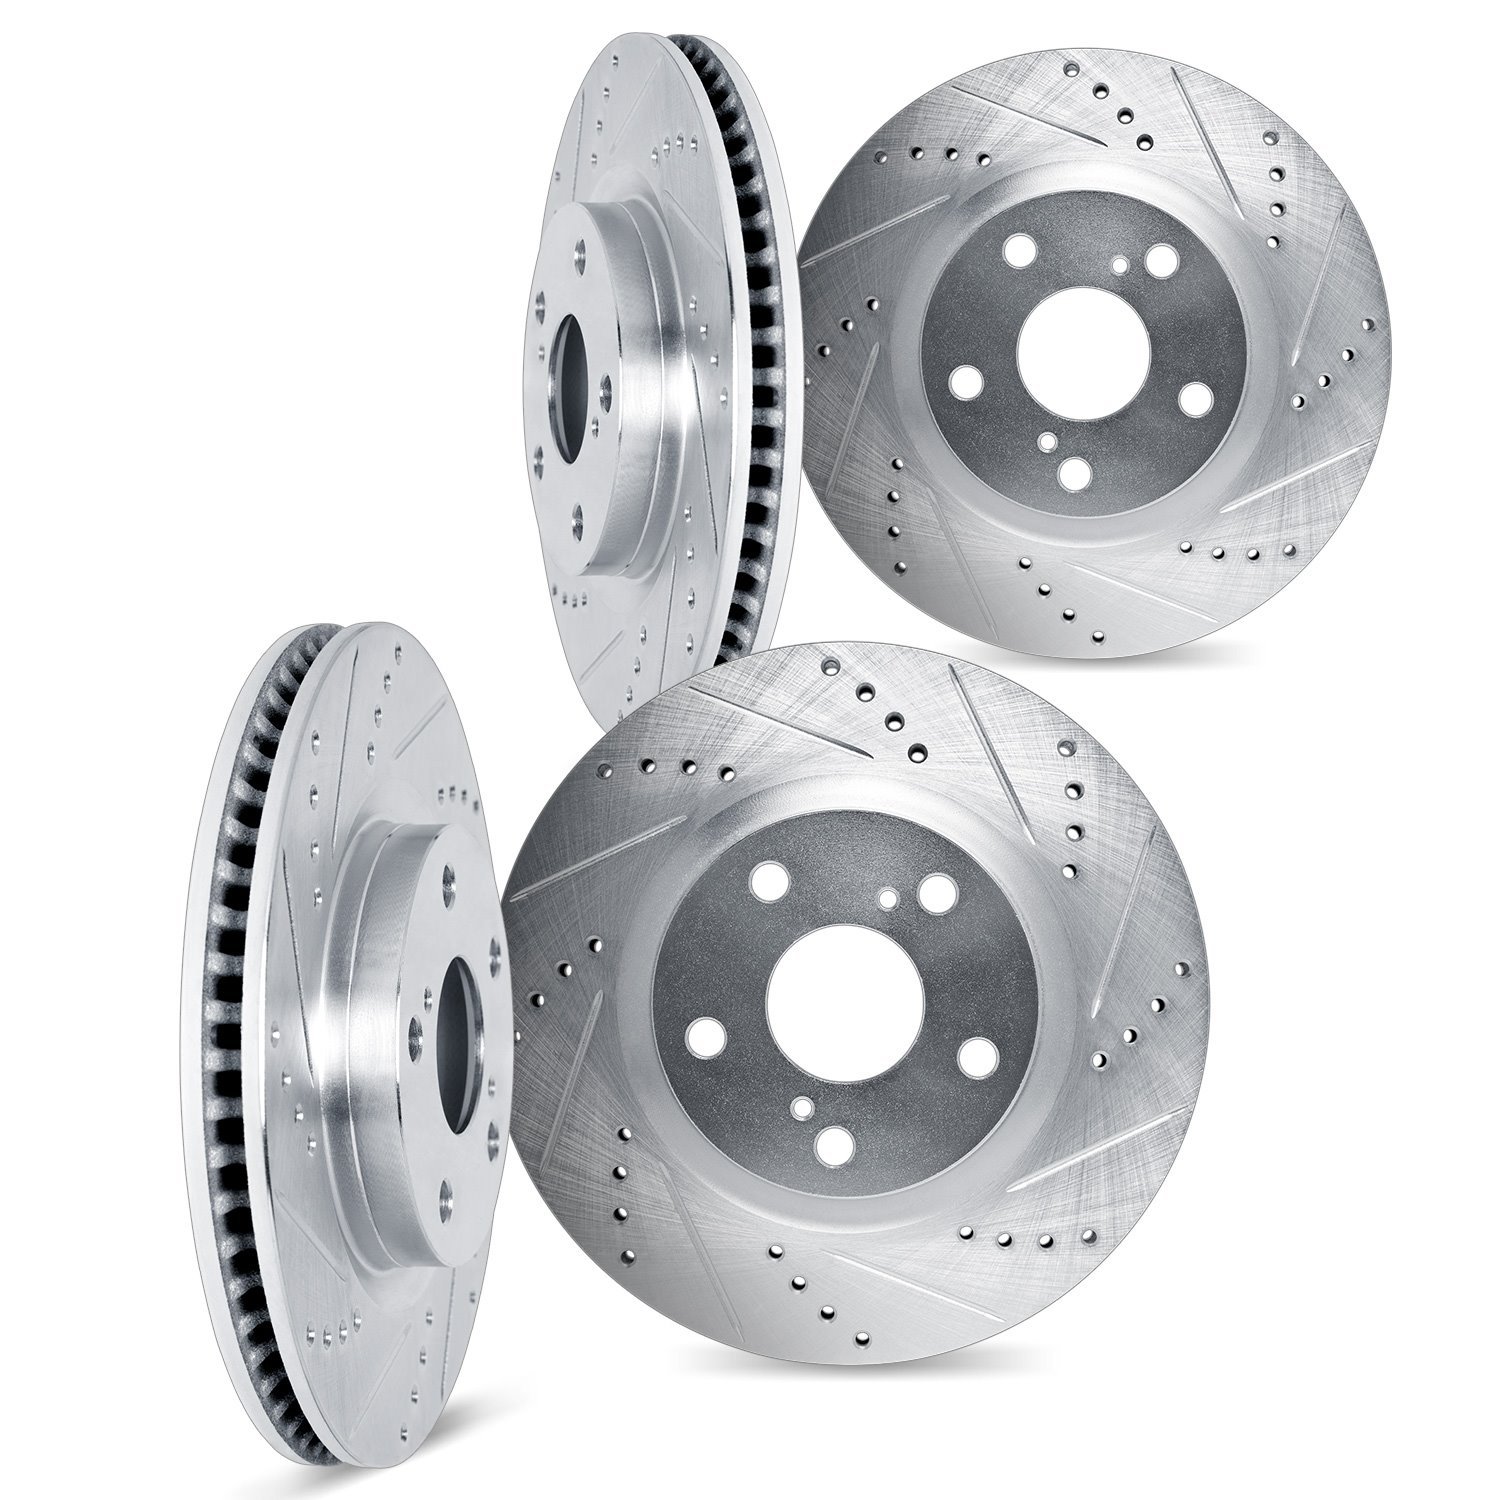 7004-31084 Drilled/Slotted Brake Rotors [Silver], Fits Select Multiple Makes/Models, Position: Front and Rear